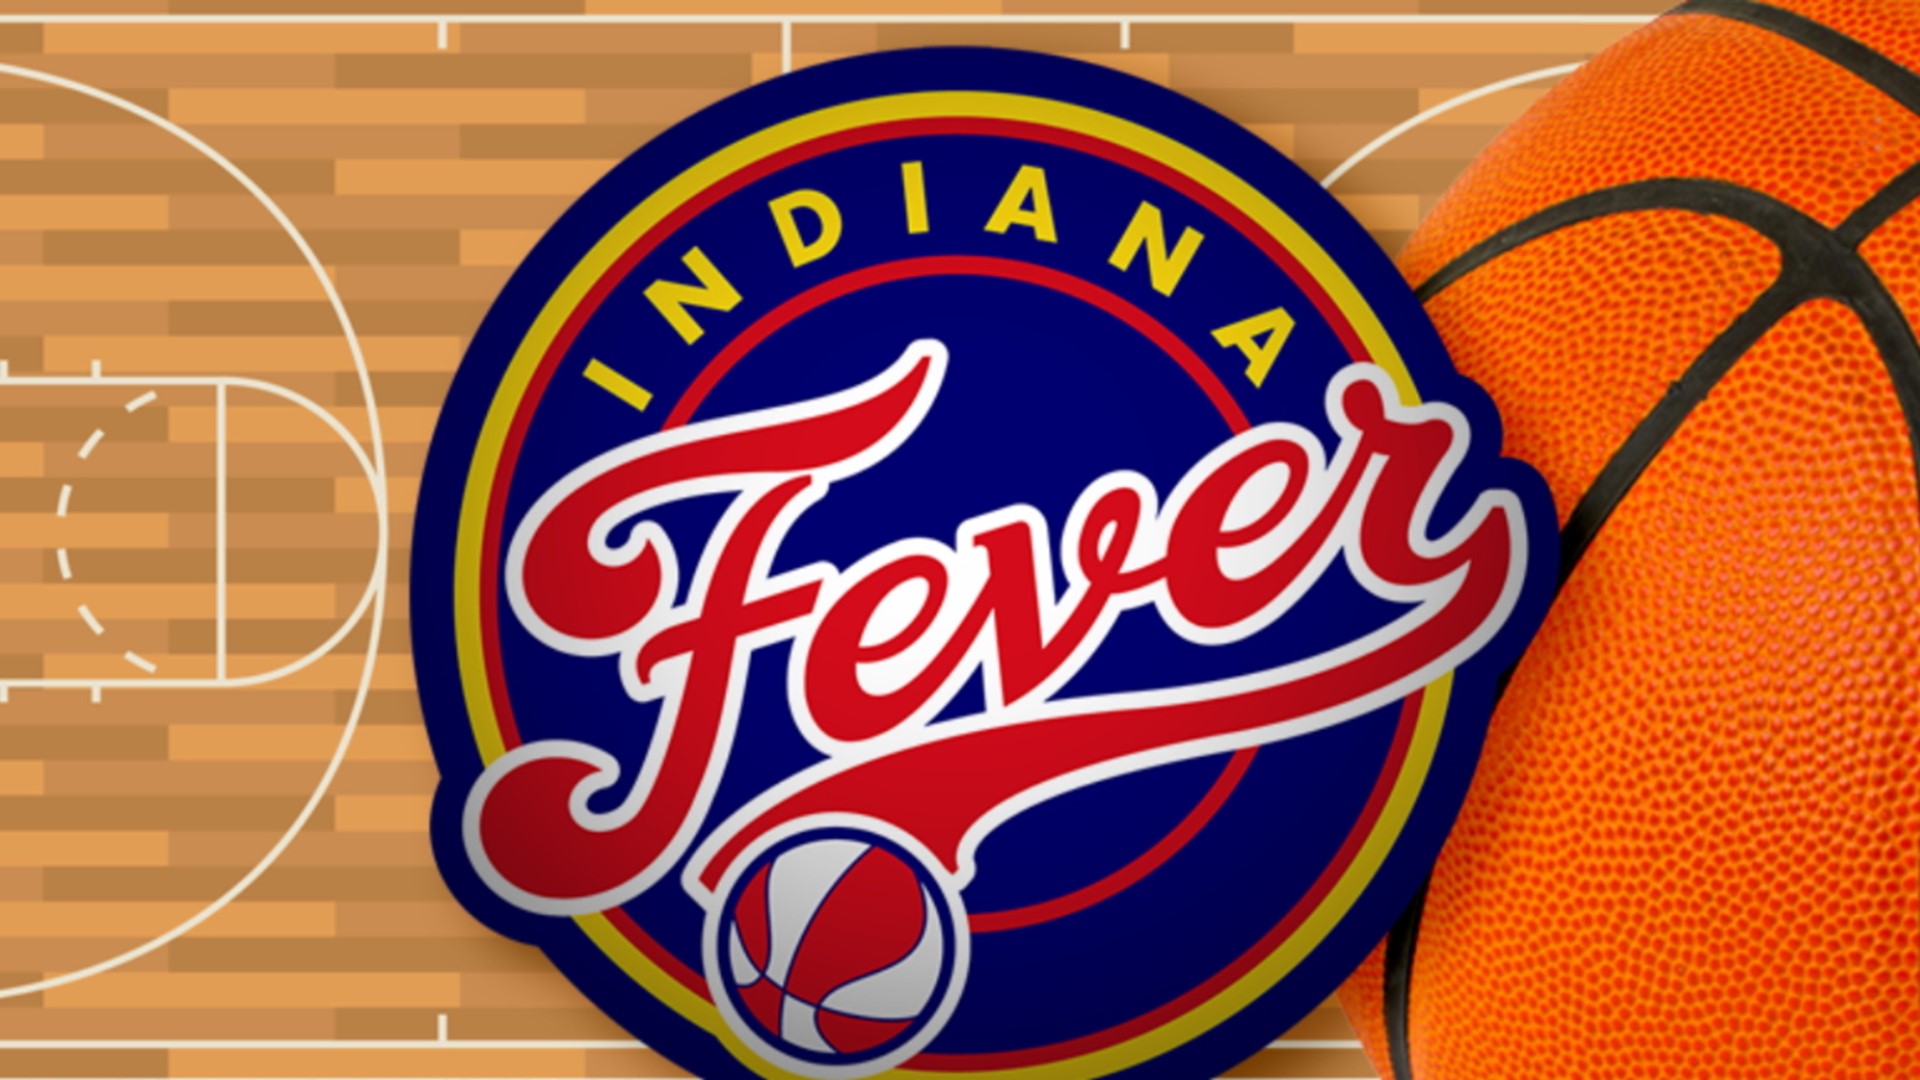 The Indiana Fever announced their schedule for next season Wednesday, including a season opener at the newly renovated Gainbridge Fieldhouse.